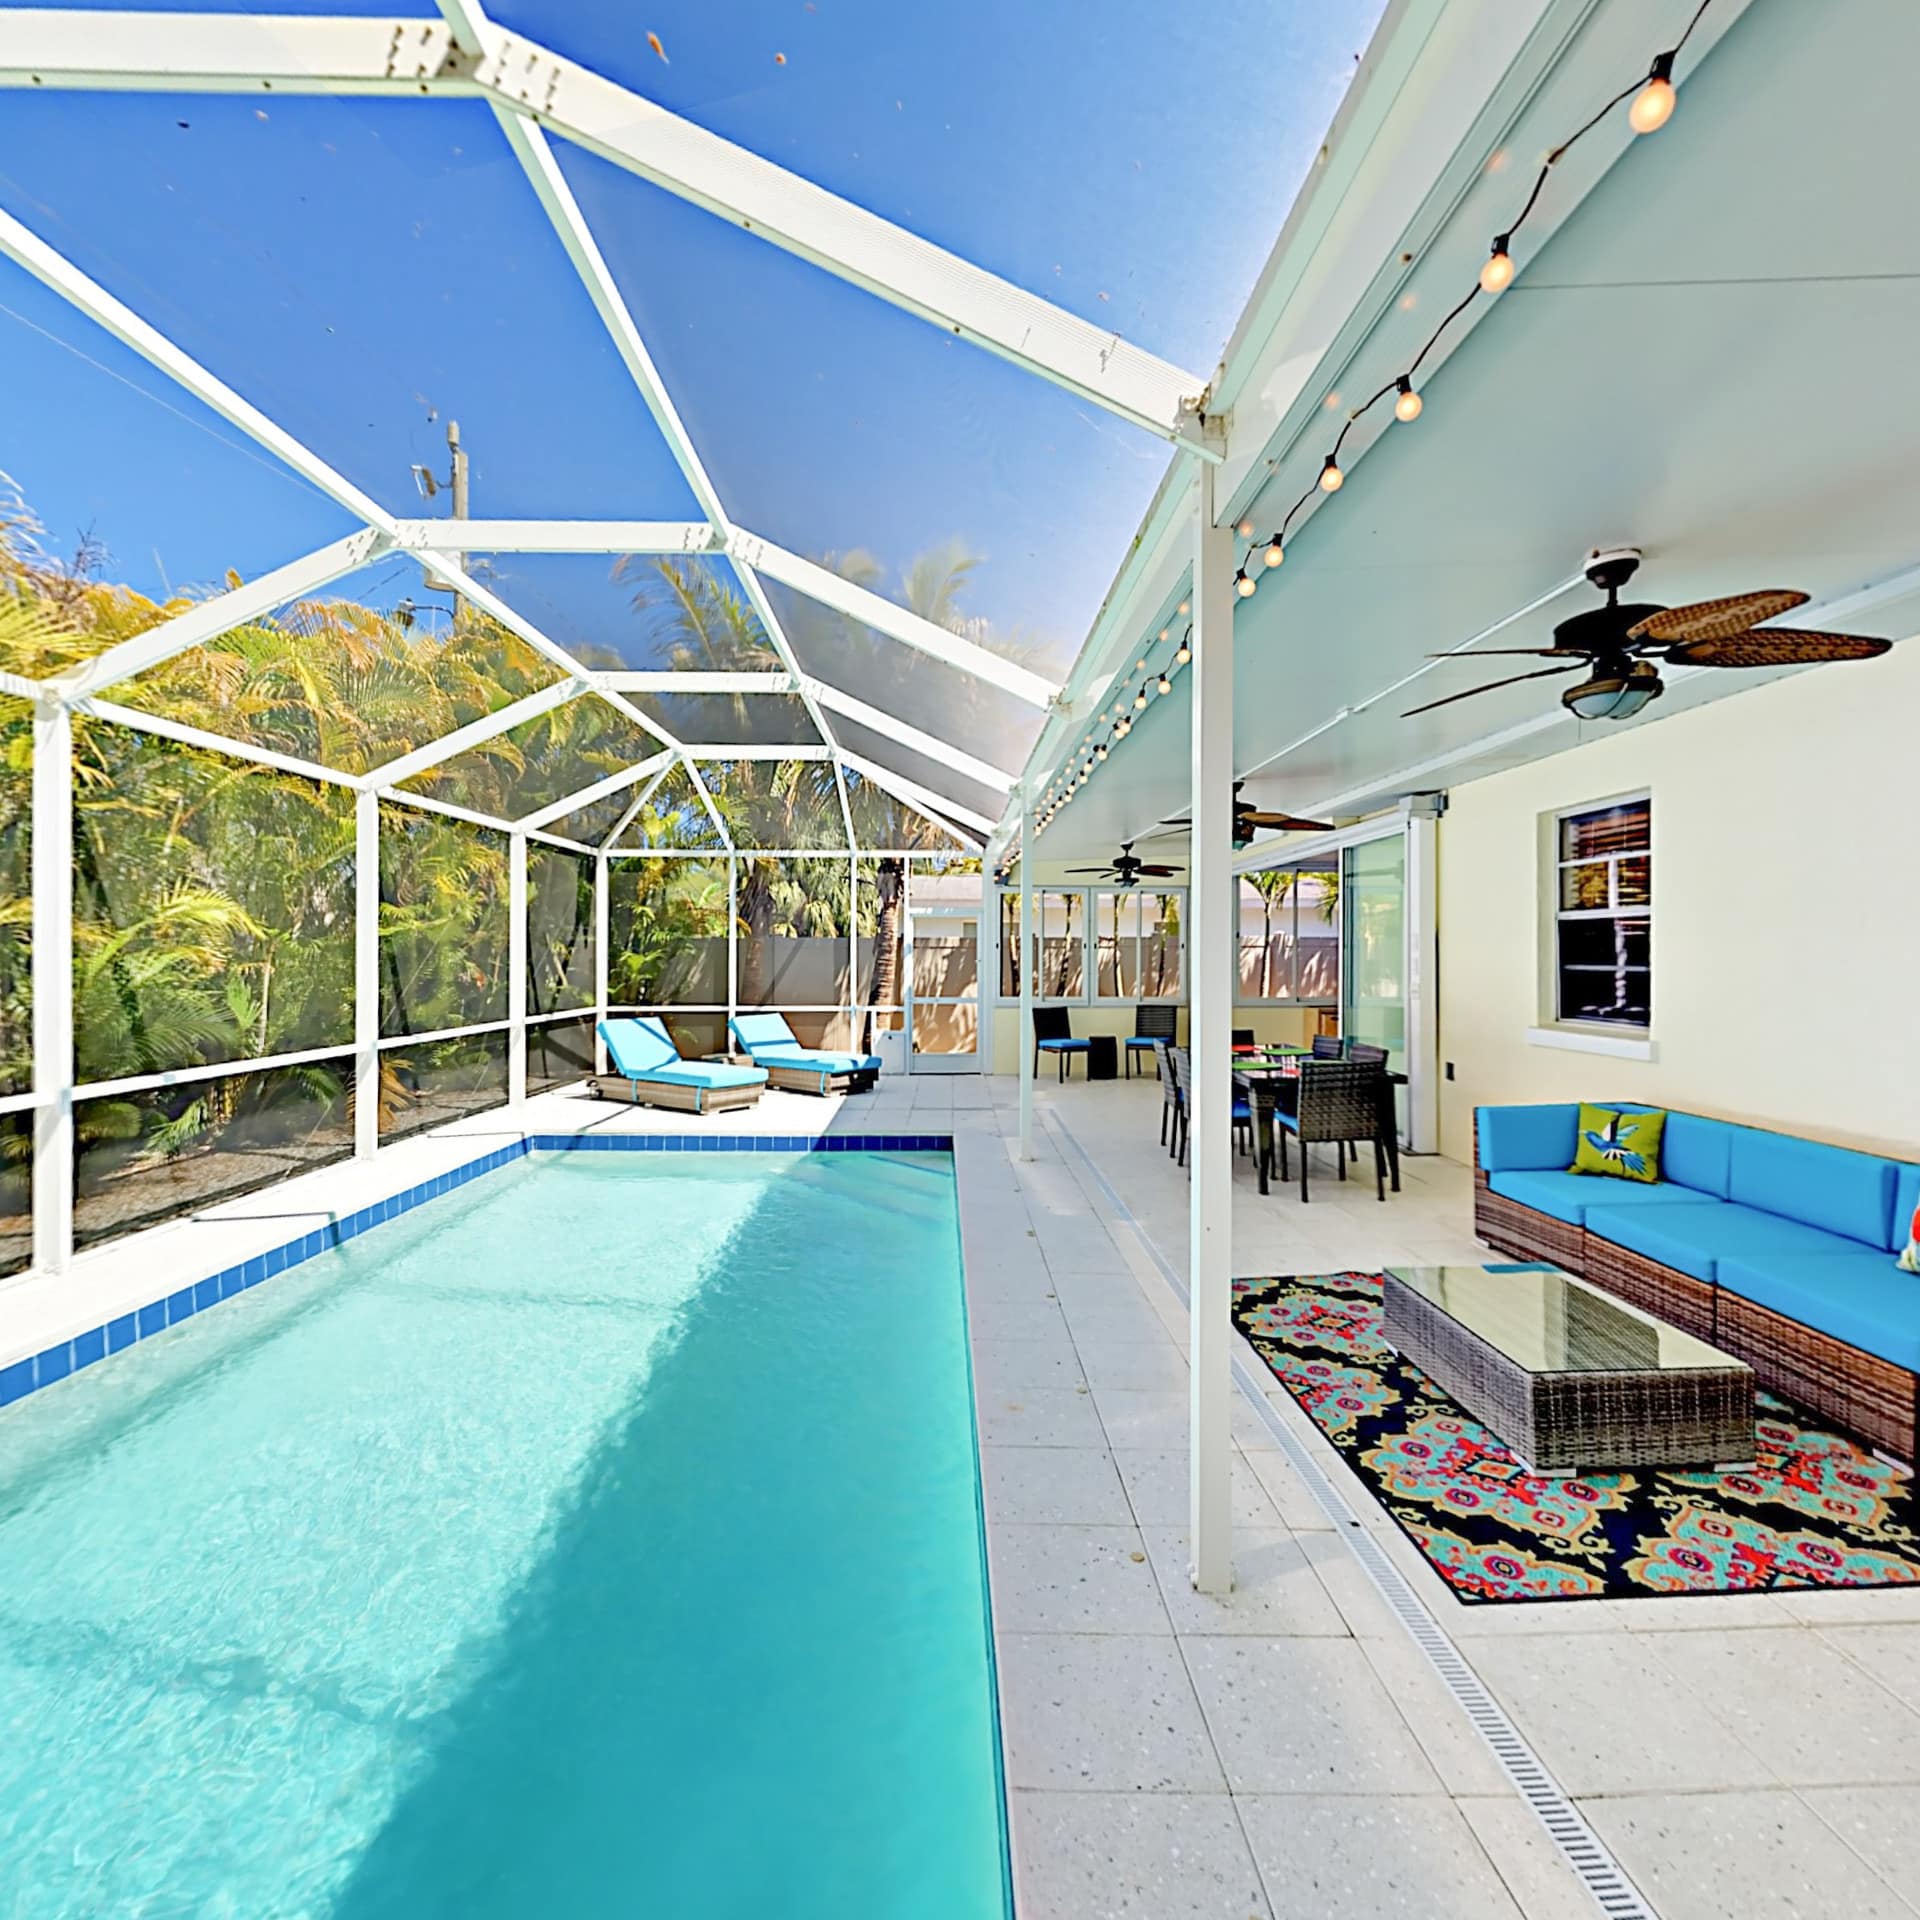 The pool of a luxurious family vacation rental in Florida